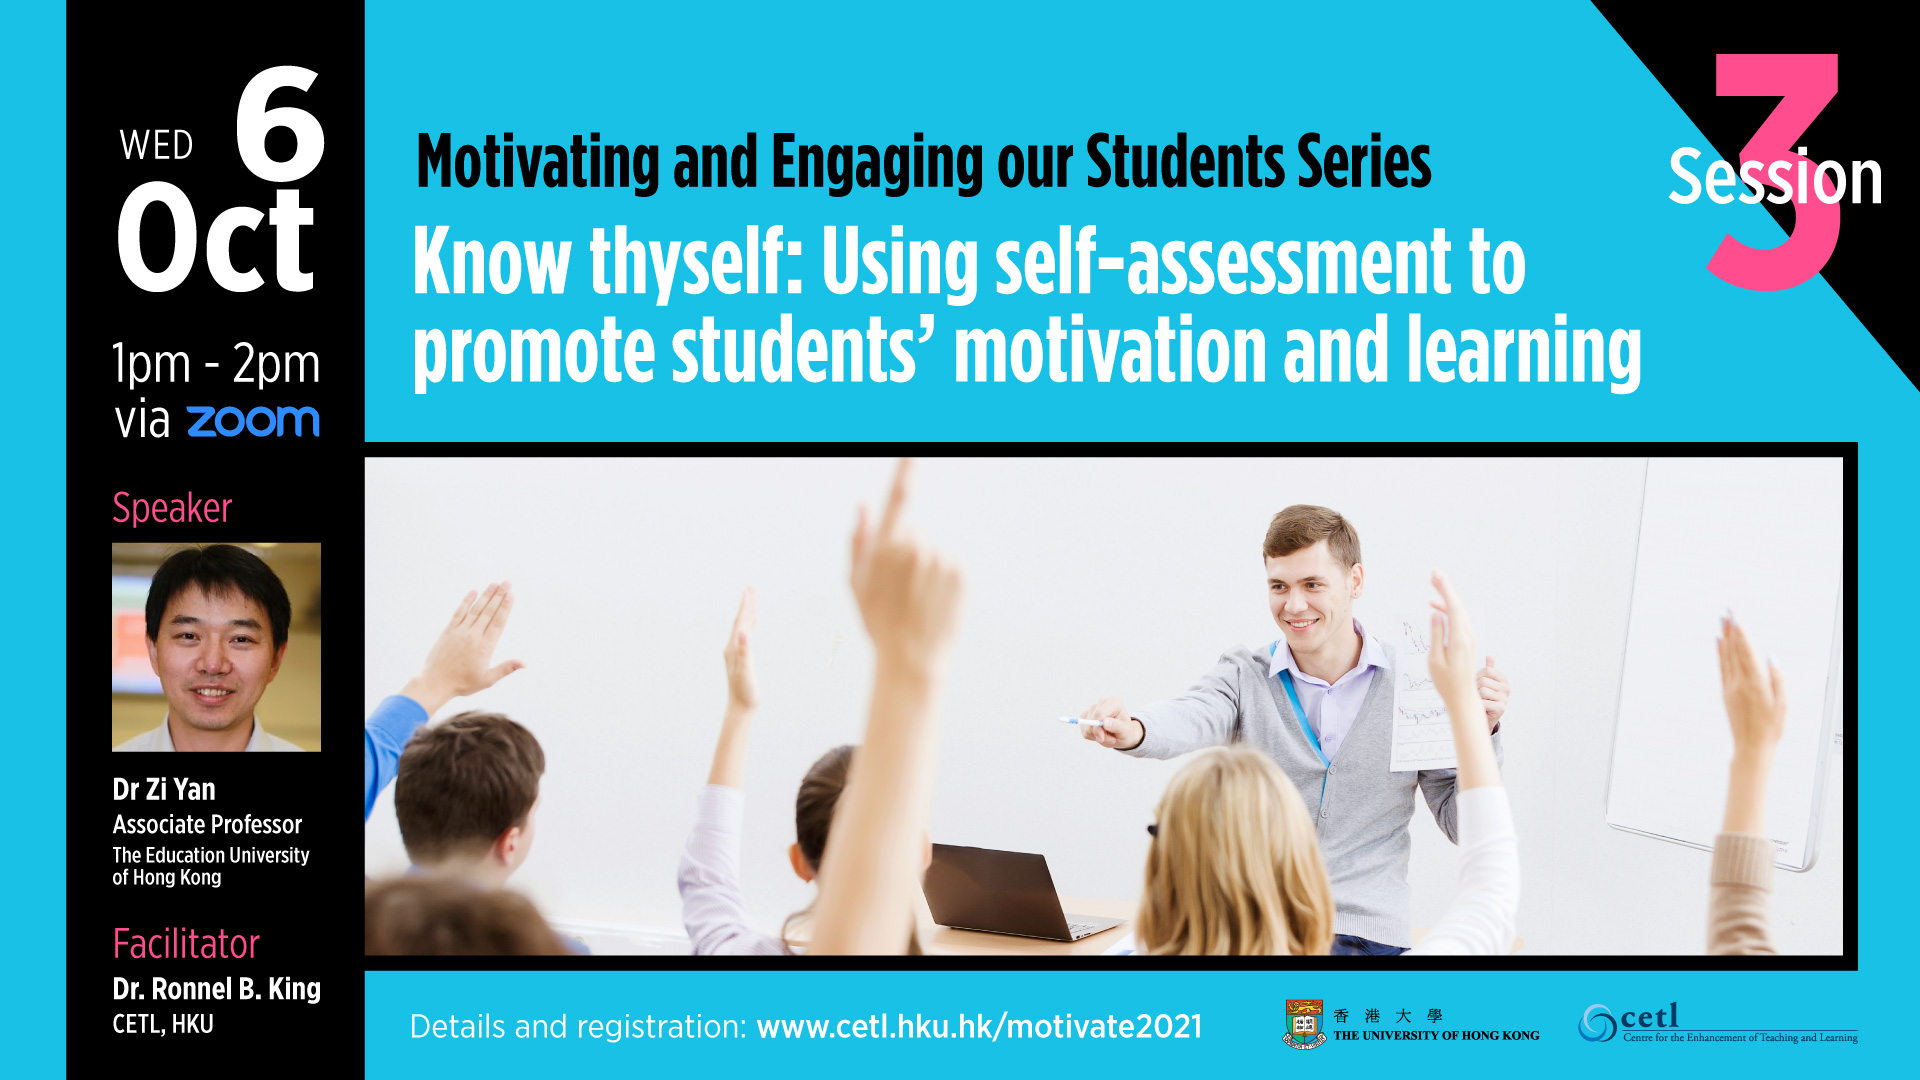 Session 3: Know thyself: Using self-assessment to promote students’ motivation and learning